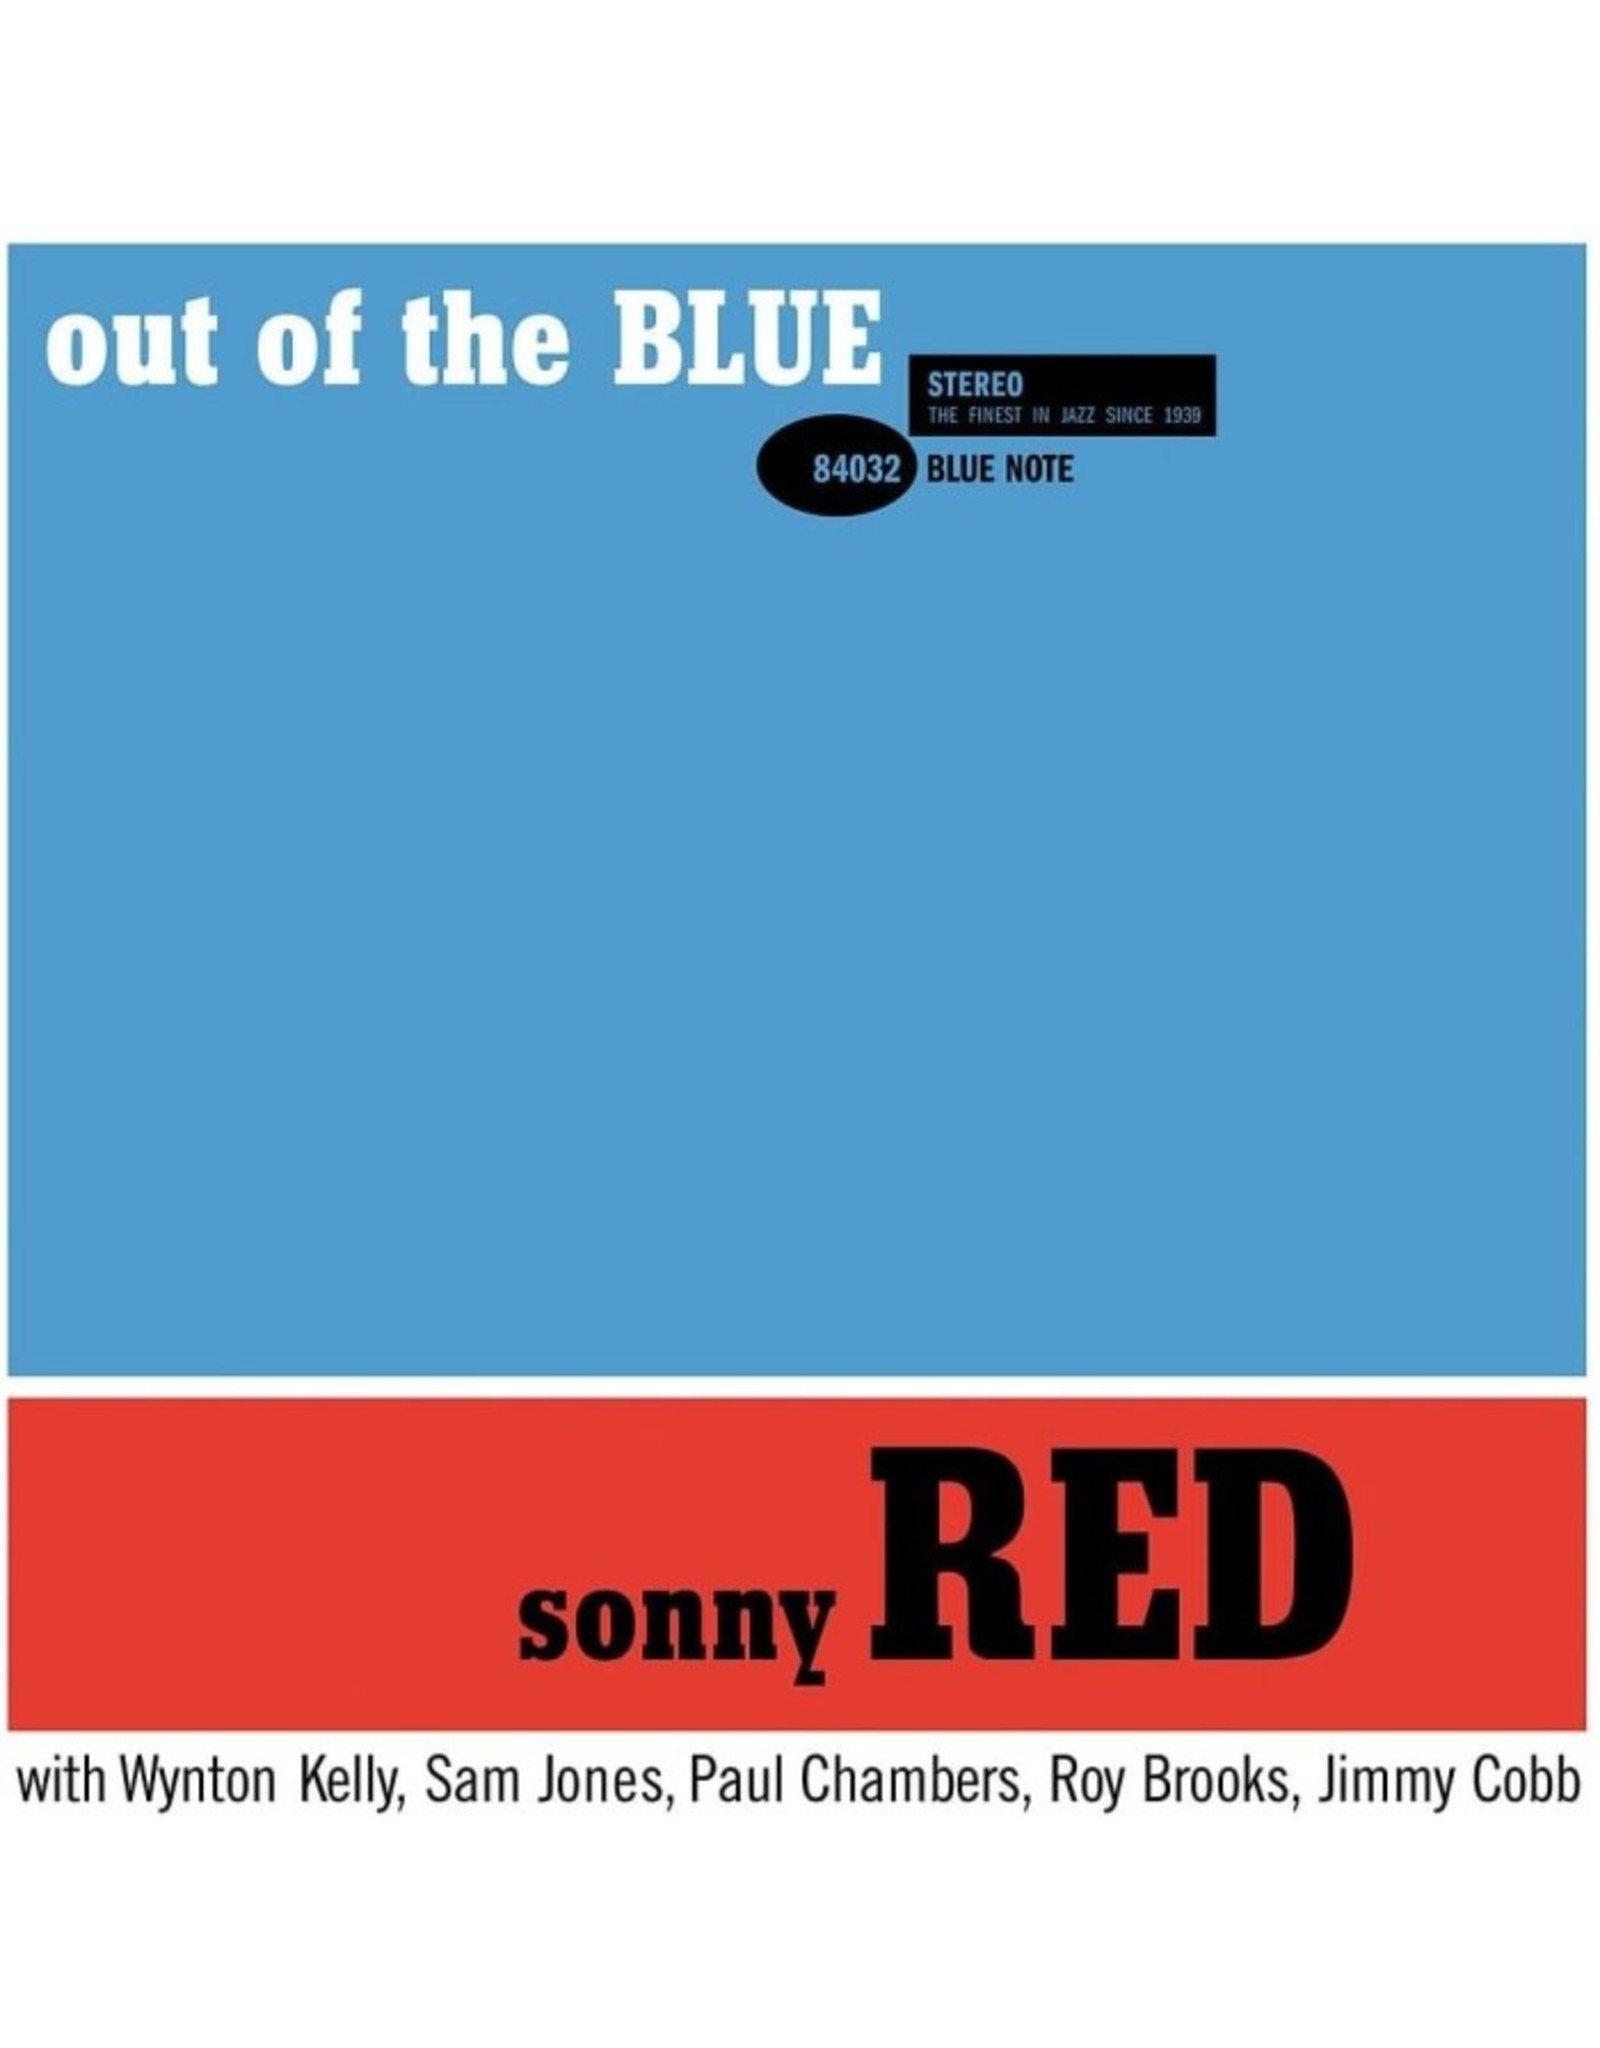 Red, Sonny - Out Of The Blue LP (180g/Gatefold) Blue Note Tone Poet Series